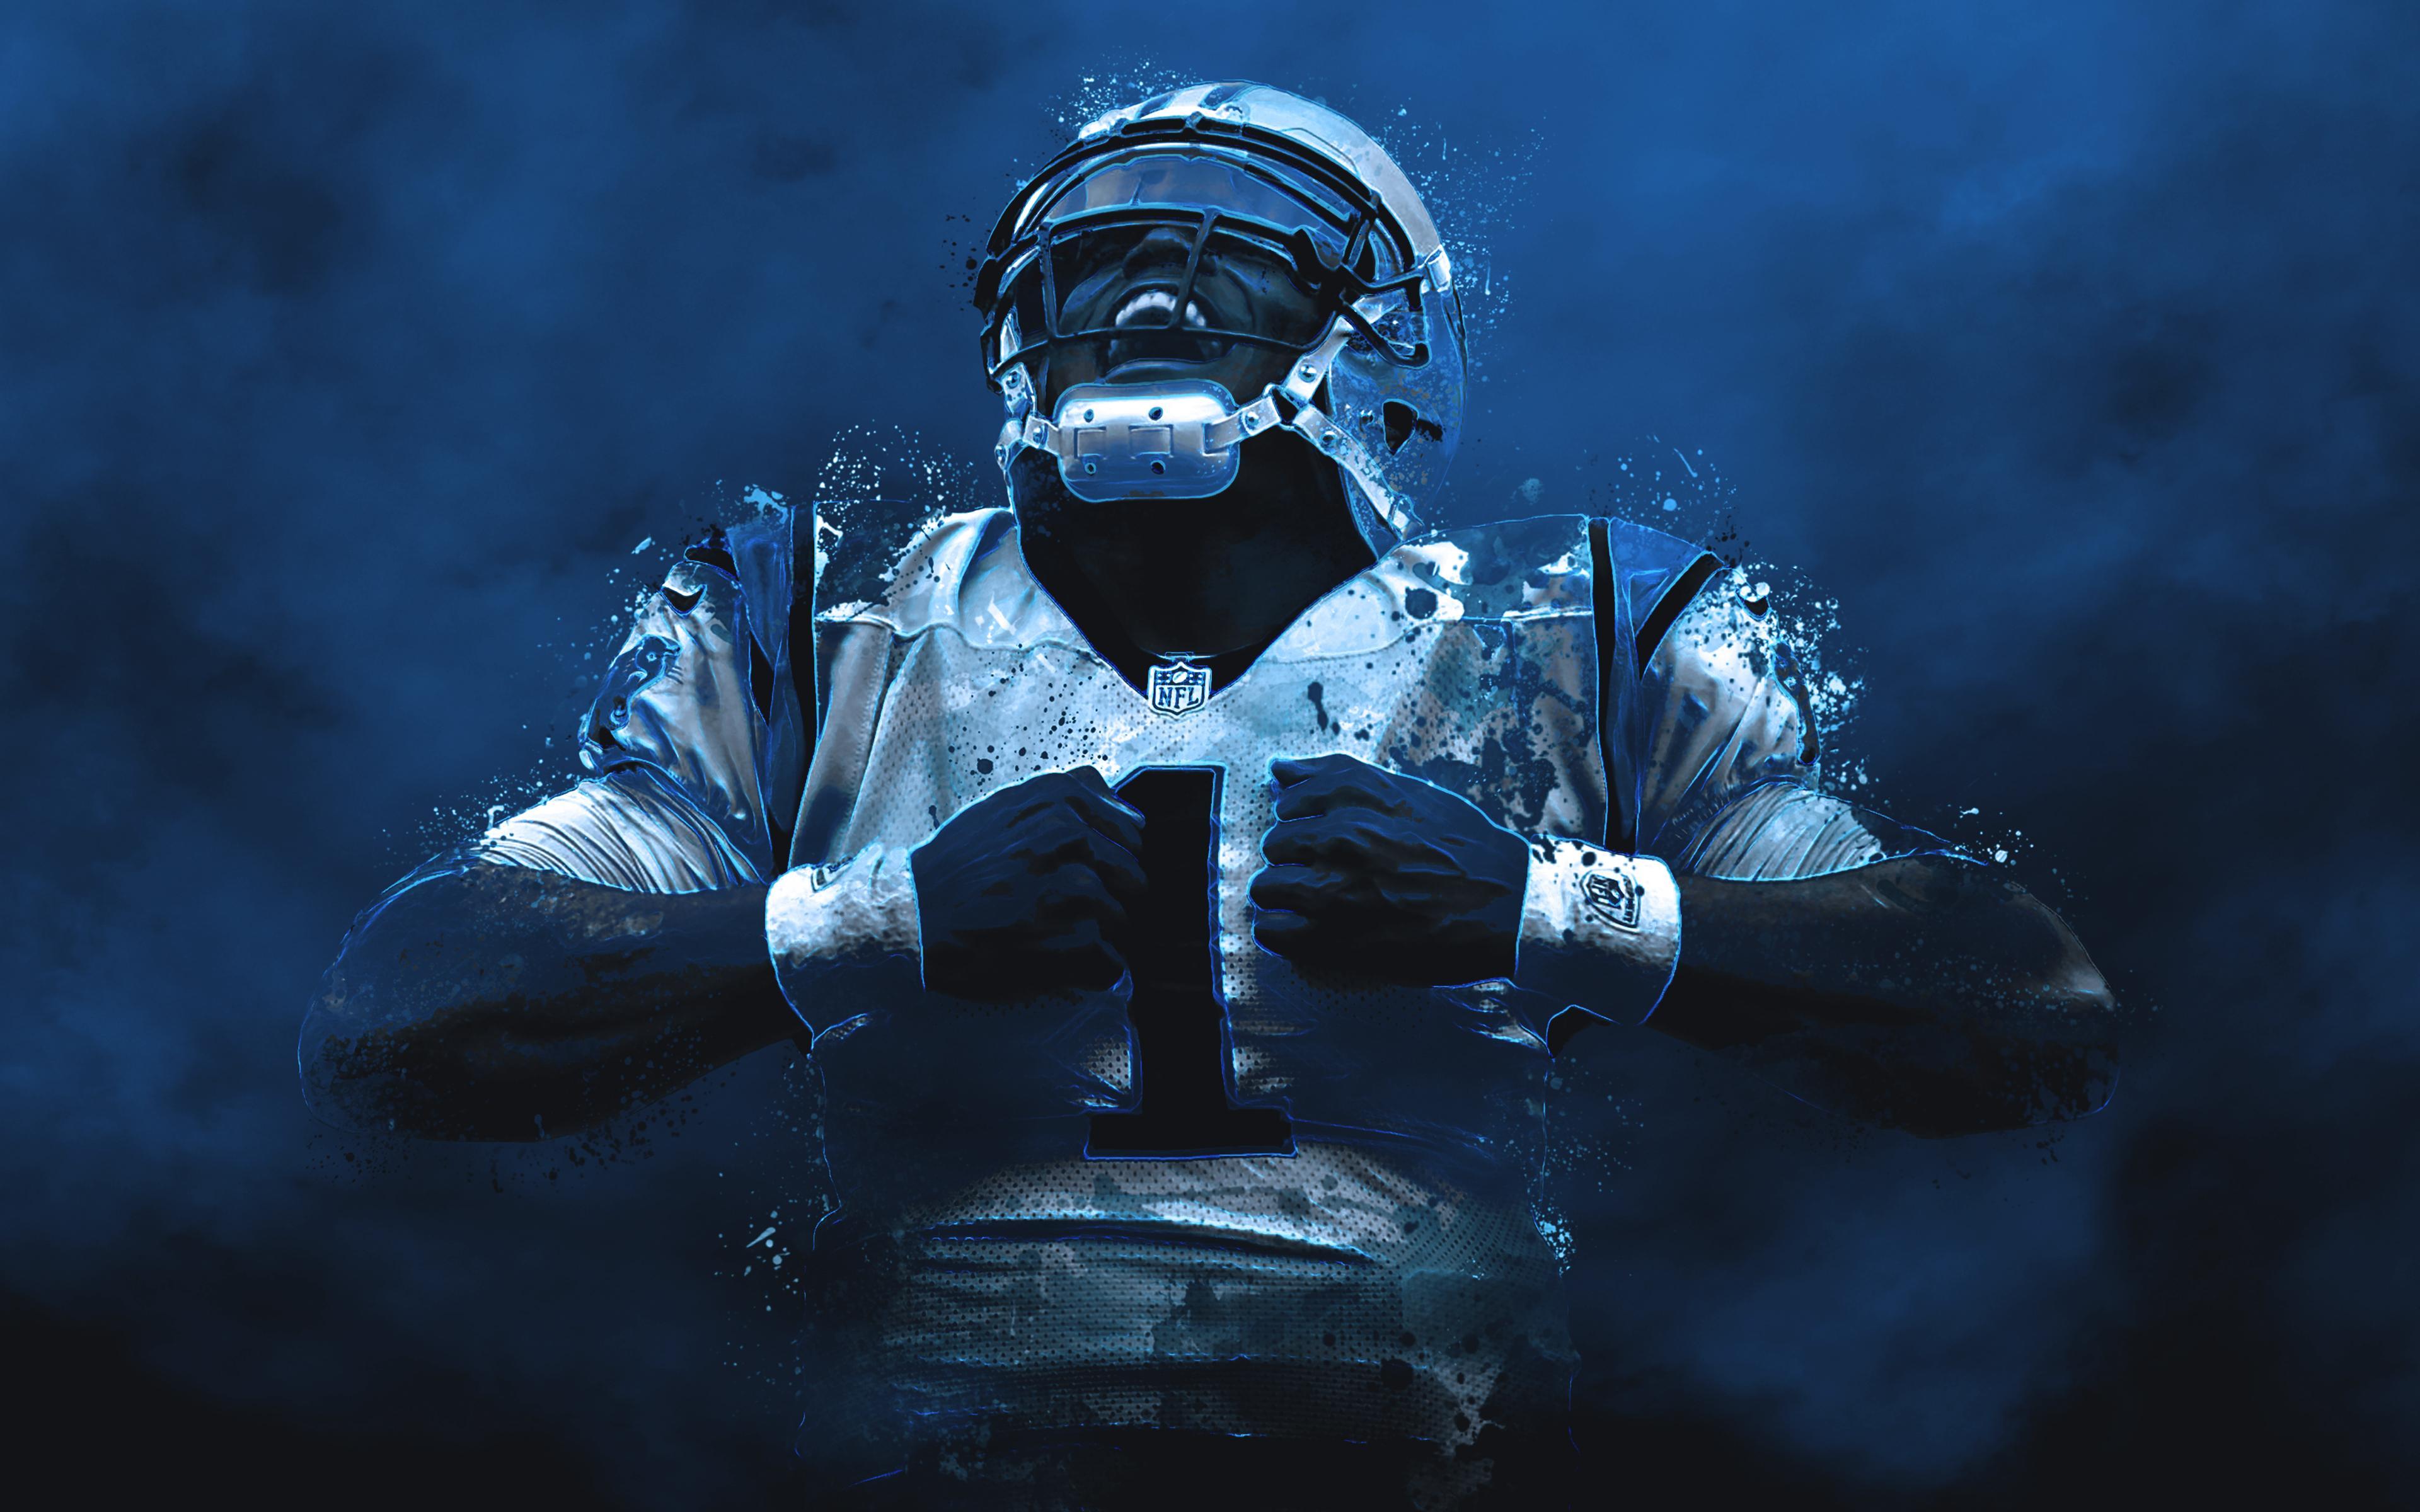 Cam Newton Wallpaper I made. Thought you guys might like it